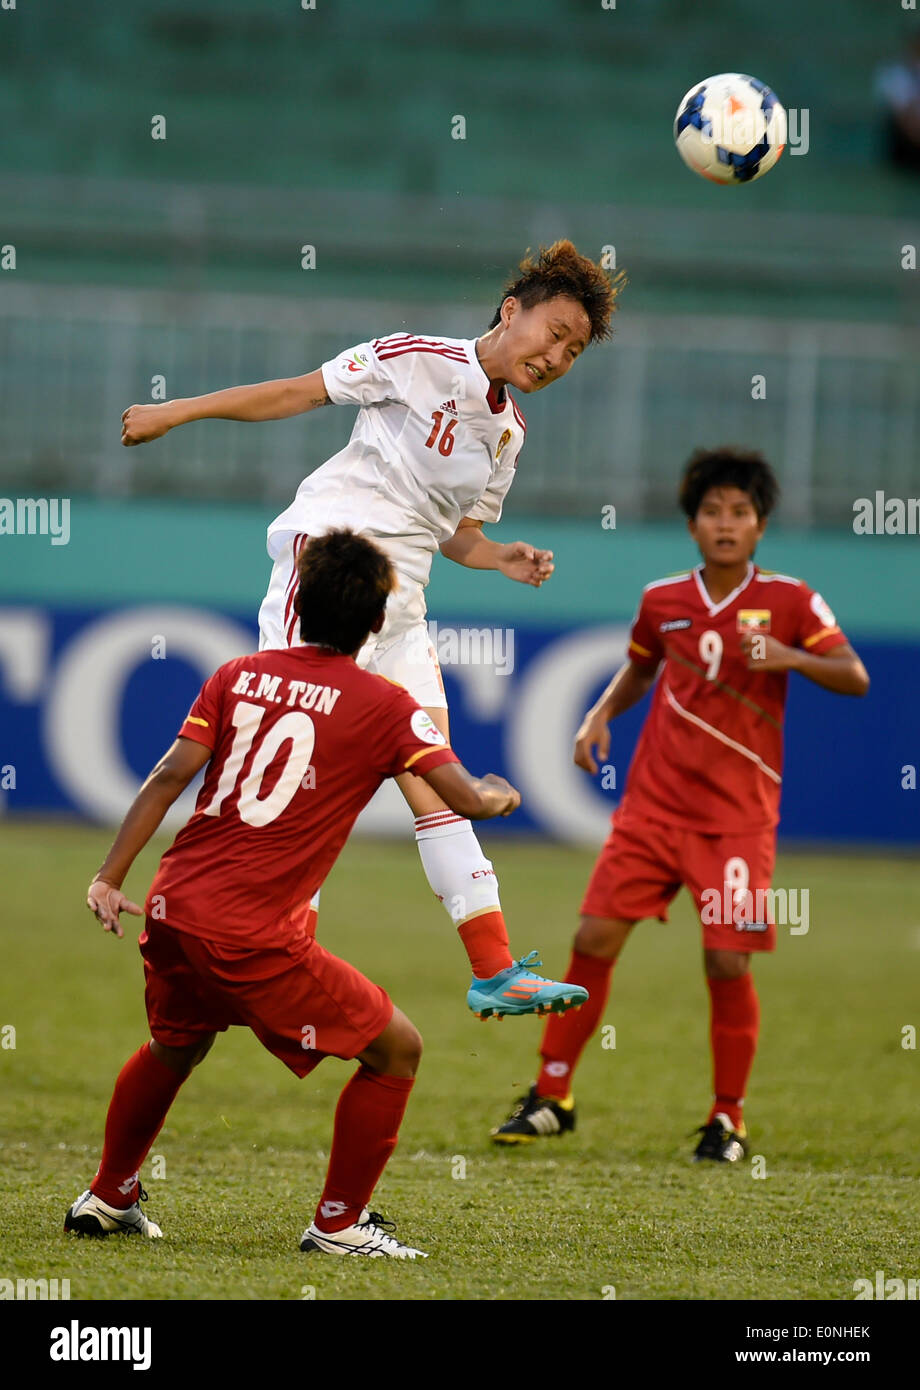 Ho Chi Minh, Vietnam. 17th May, 2014. Wang Chen (C) of China vies for the ball during the Group B match against Myanmar at the 2014 Women's AFC Cup held at Thong Nhat Stadium in Ho Chi Minh city, Vietnam, May 17, 2014. China advanced to World Cup 2015 after beating Myanmar 3-0. © He Jingjia/Xinhua/Alamy Live News Stock Photo